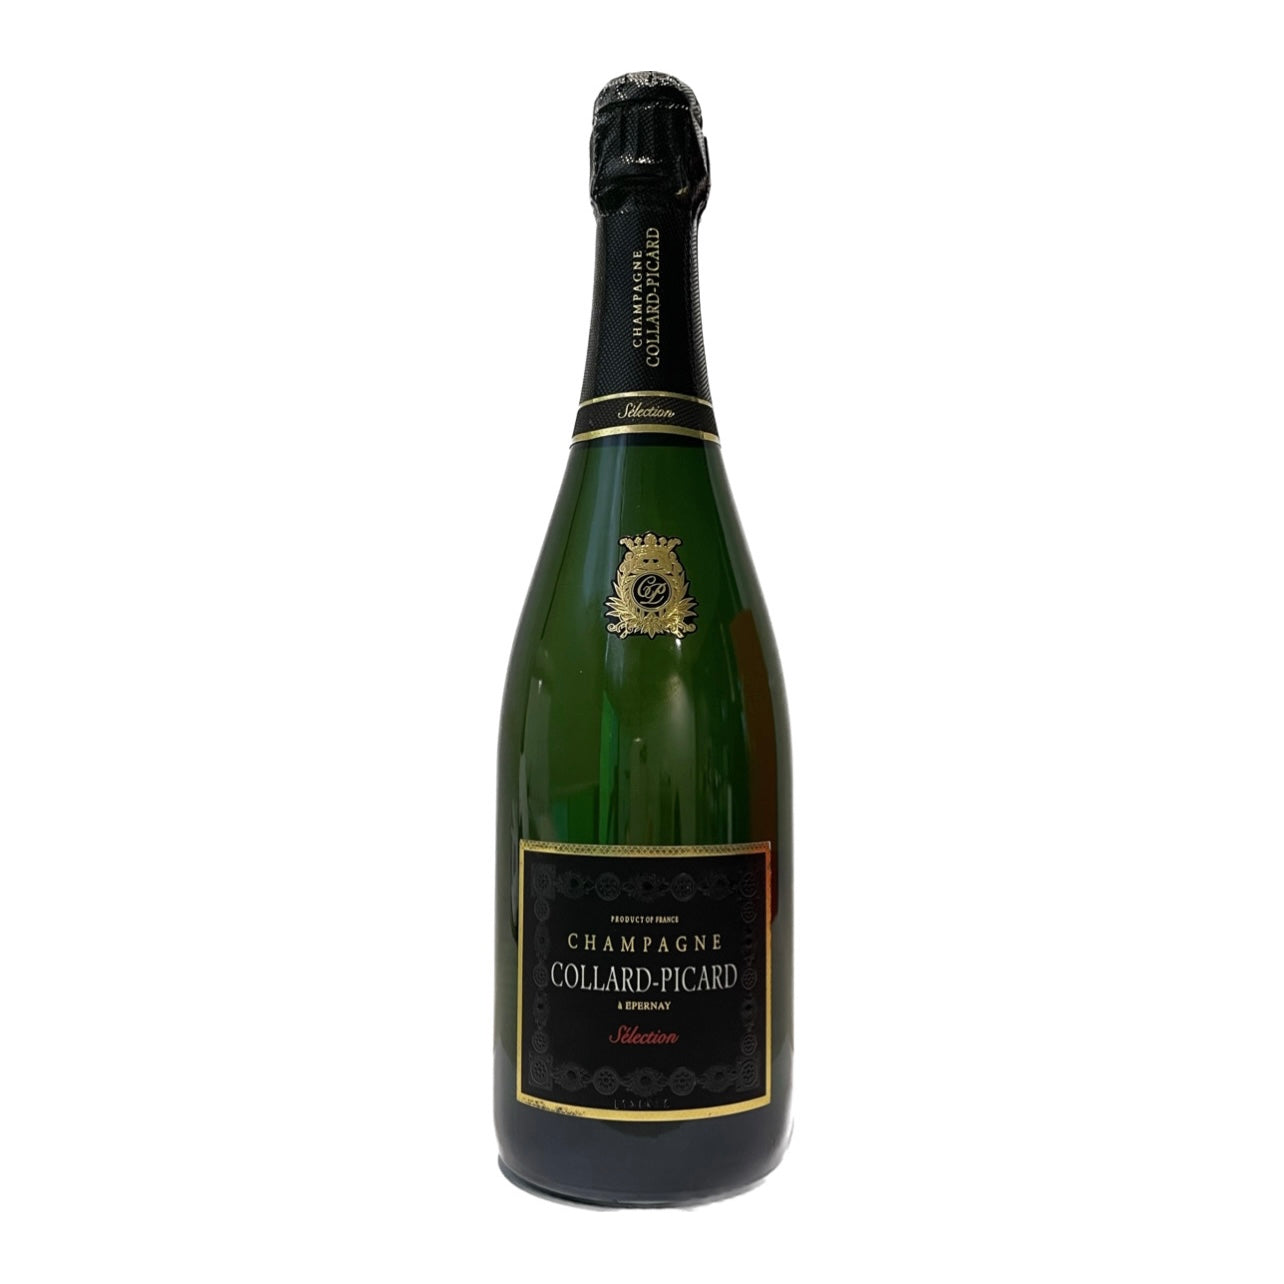 CHAMPAGNE EXTRA BRUT "SELECTION" - COLLARD-PICARD